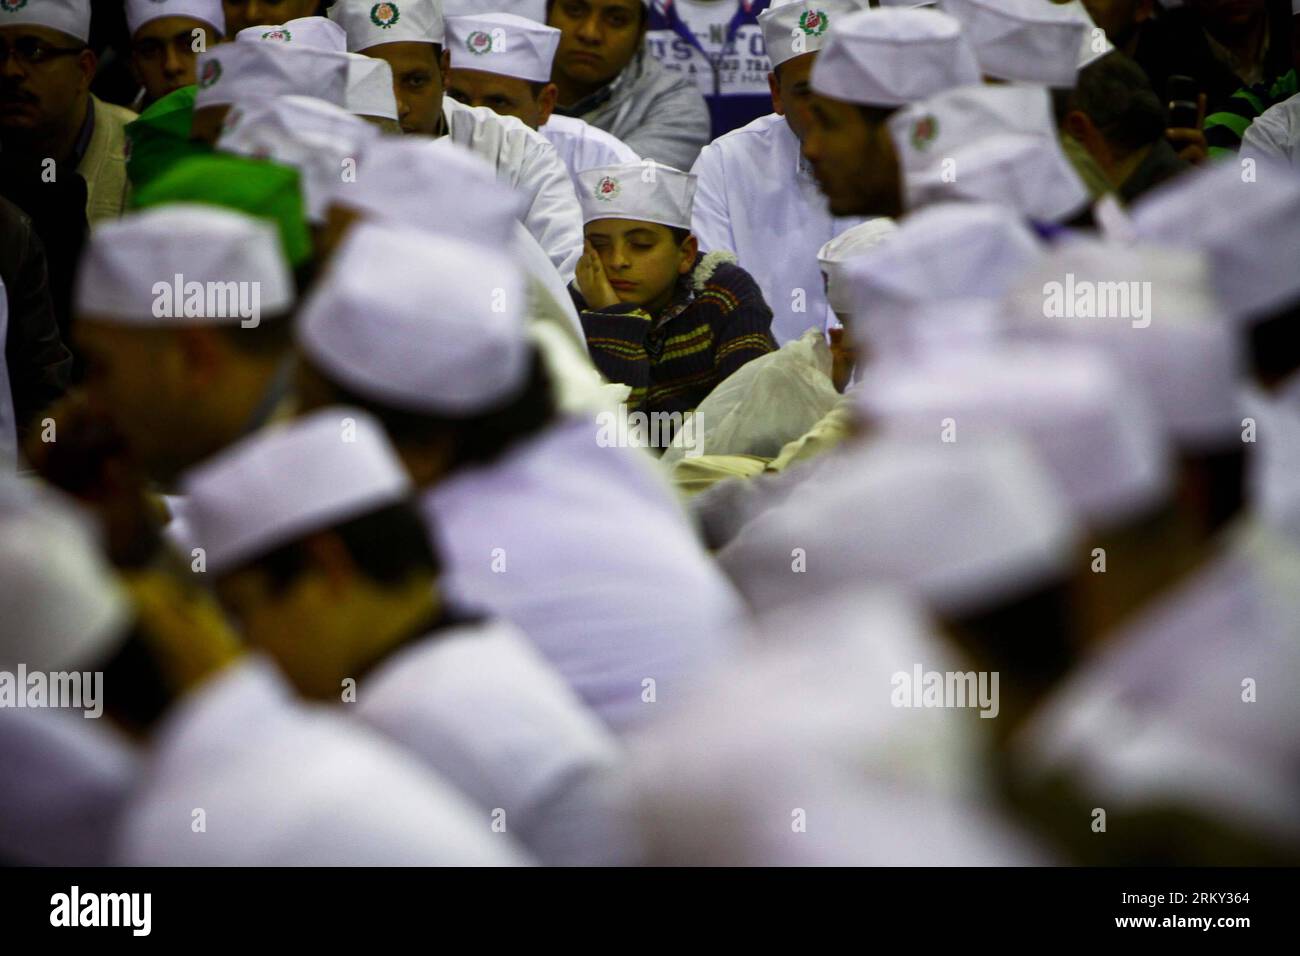 Bildnummer: 59130664  Datum: 24.01.2013  Copyright: imago/Xinhua (130124) -- CAIRO, Jan. 24, 2013 (Xinhua) -- An Egyptian boy sleeps as hundreds of Sufi Muslims take part in sufi celebration rituals to celebrate the birth of Prophet Mohammed, at Al-Hussein mosque in Cairo, Egypt, Jan. 24, 2013. Hundreds of millions of Muslims celebrated the anniversary of Prophet Muhammad s birth all over the world. (Xinhua/Amru Salahuddien) EGYPT-CAIRO-PROPHET MOHAMMED BIRTH-ANNIVERSARY PUBLICATIONxNOTxINxCHN Gesellschaft Religion Islam Muslim Feiertag Gebet xjh x0x premiumd 2013 quer      59130664 Date 24 01 Stock Photo